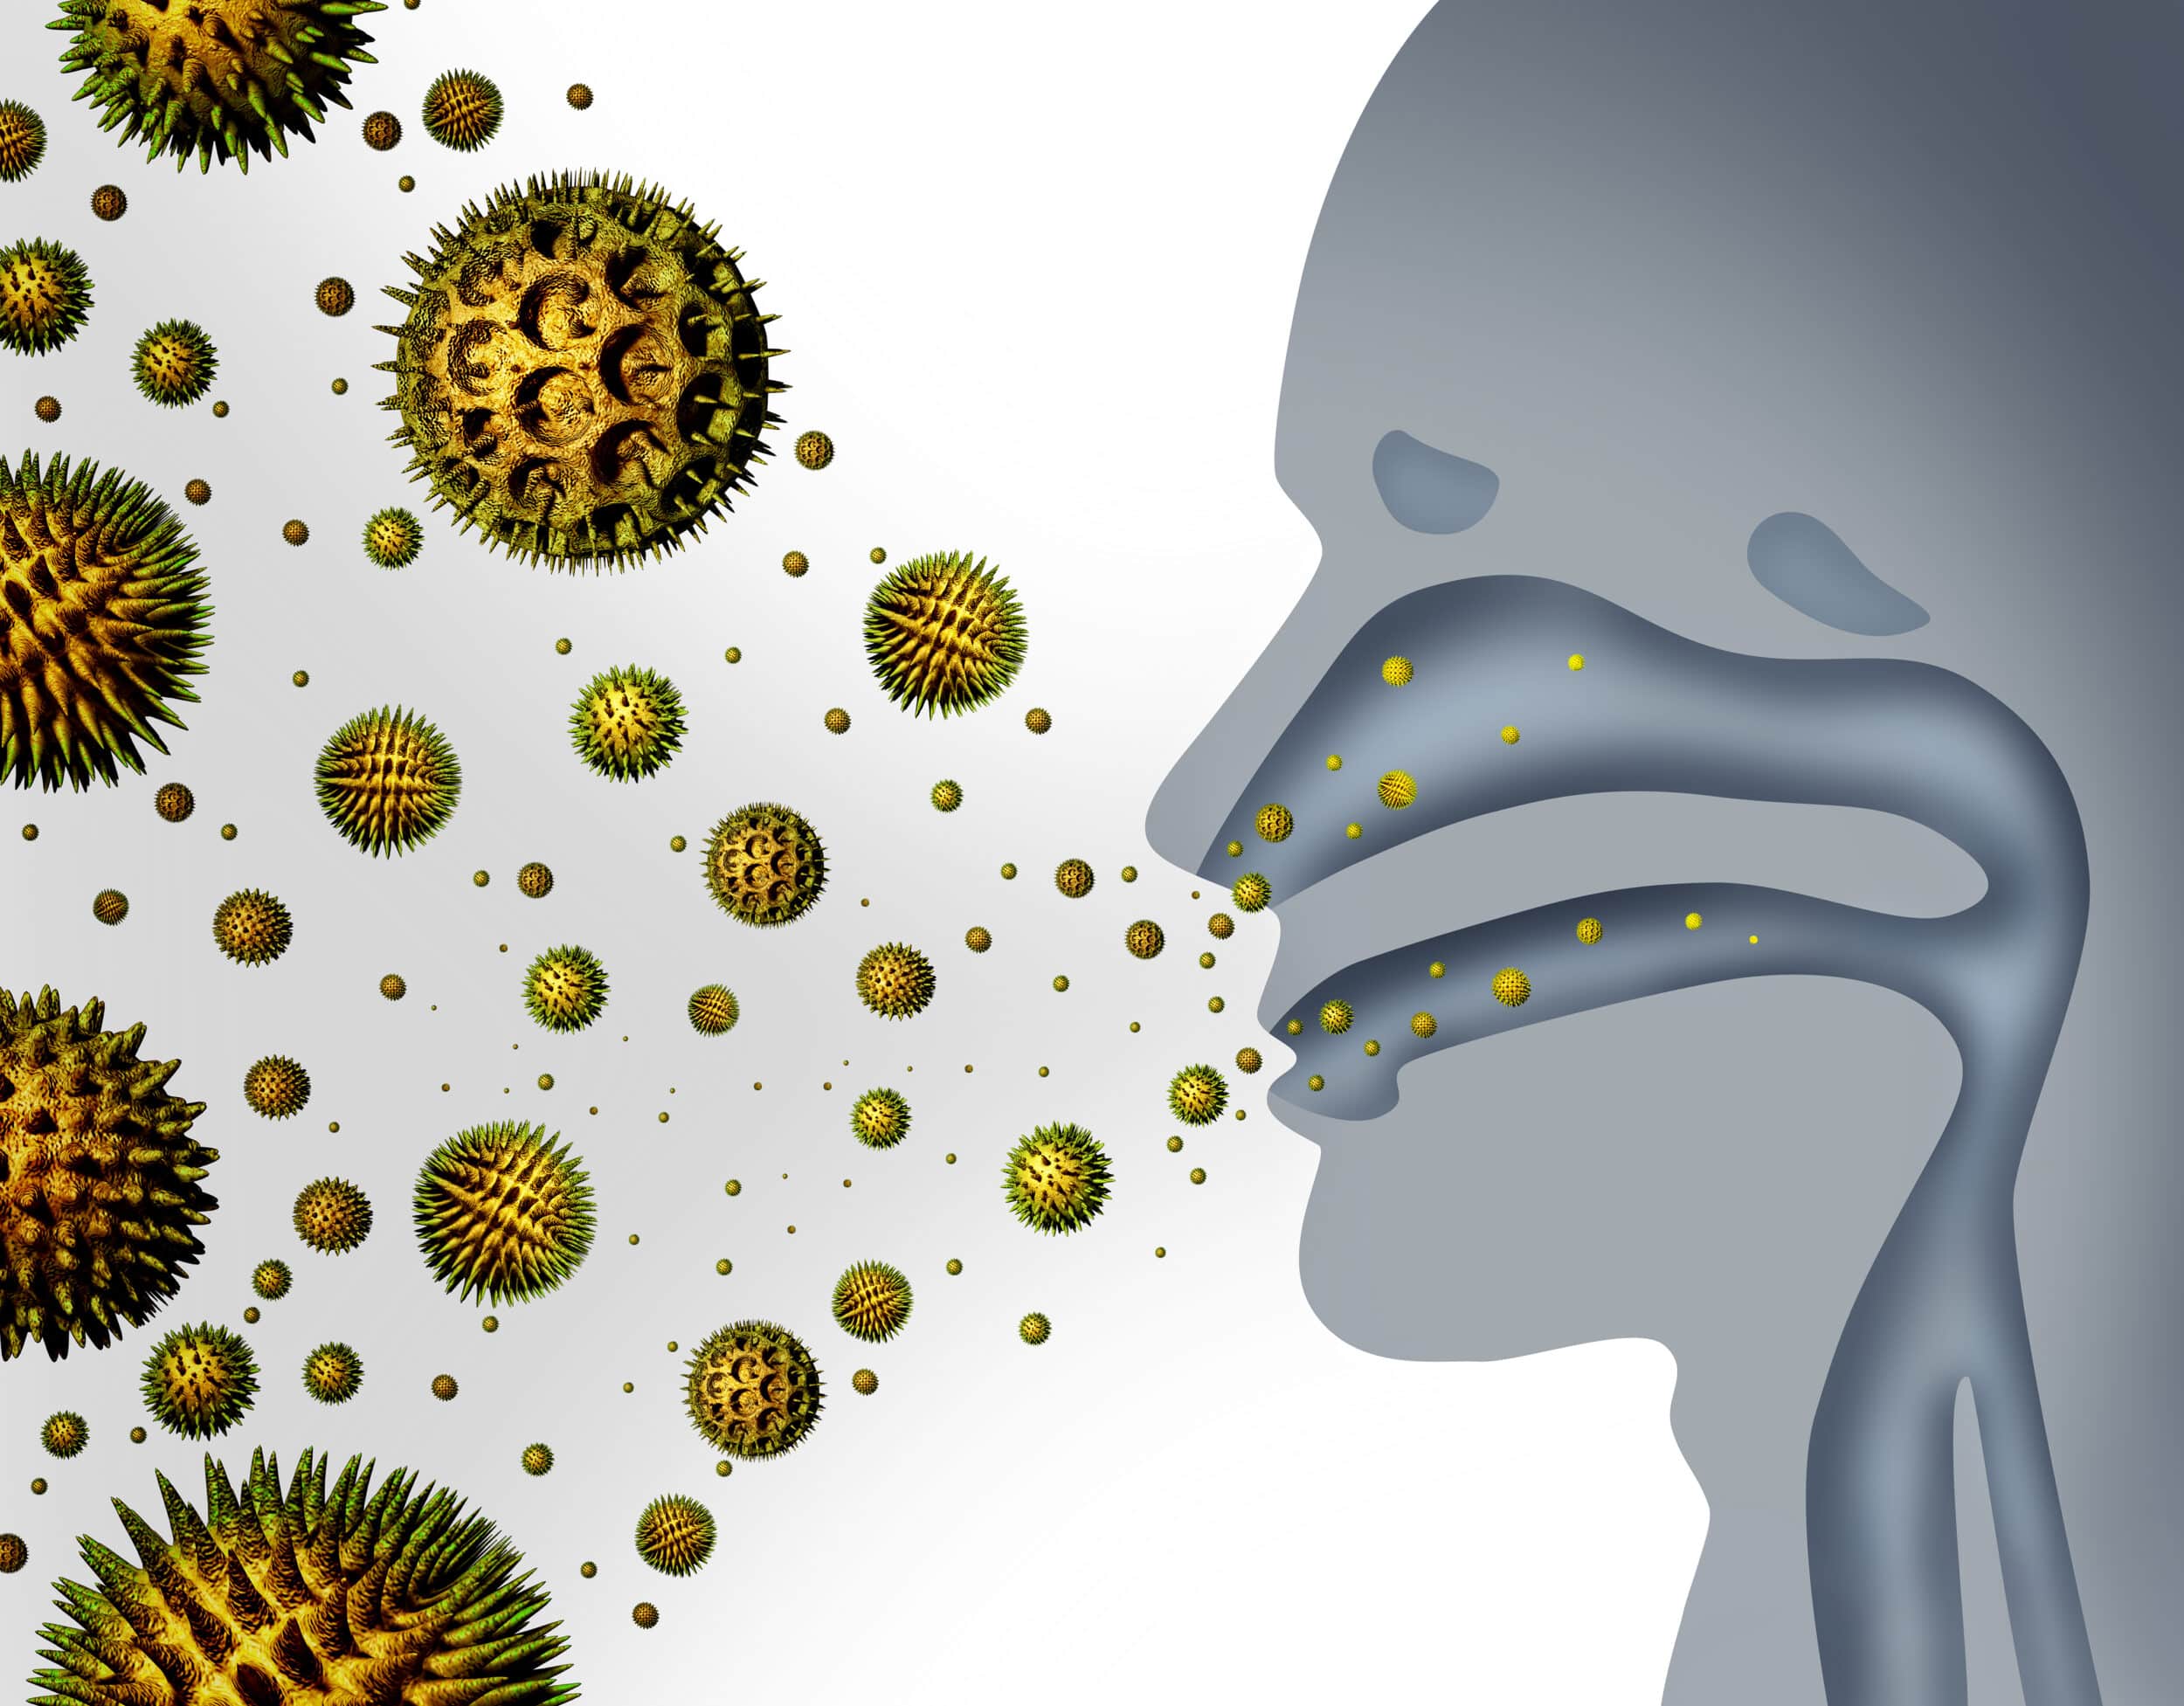 Hay fever and pollen allergies and medical allergy concept as a group of microscopic organic pollination particles flying in the air with a human breathing diagram as a health care symbol of seasonal illness.